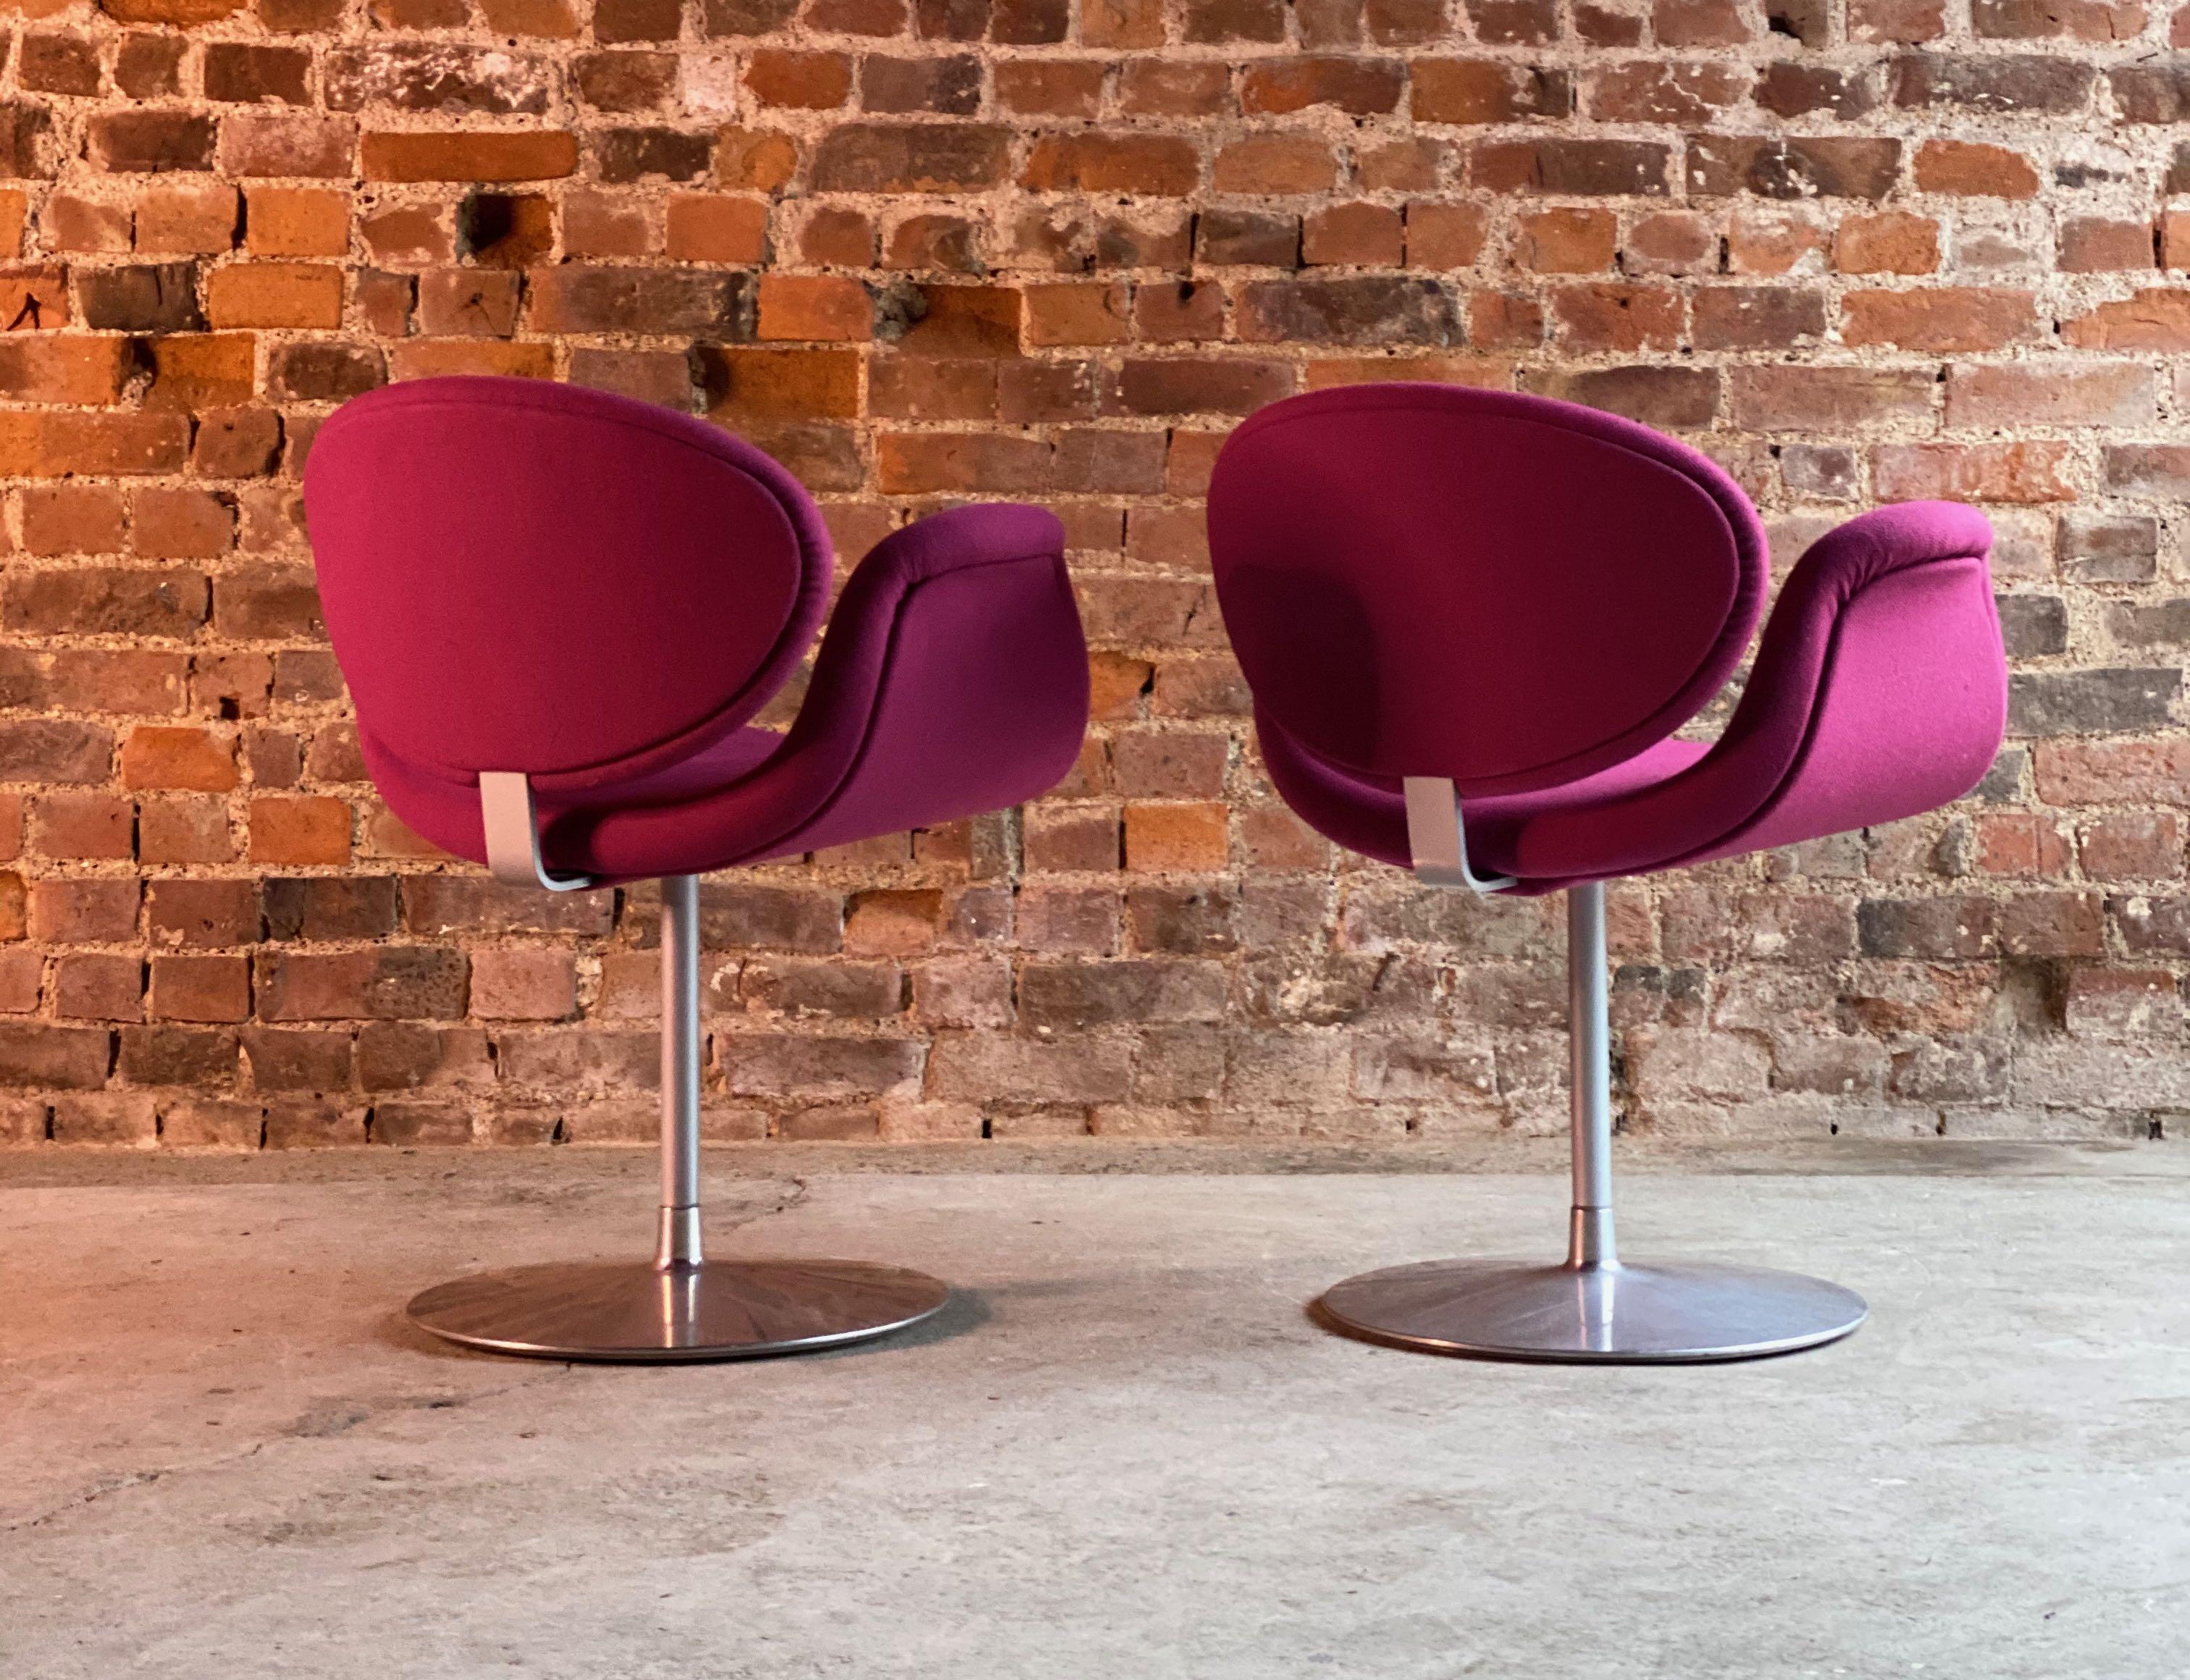 Contemporary Tulip Chairs by Pierre Paulin by Artifort Netherlands, circa 2000